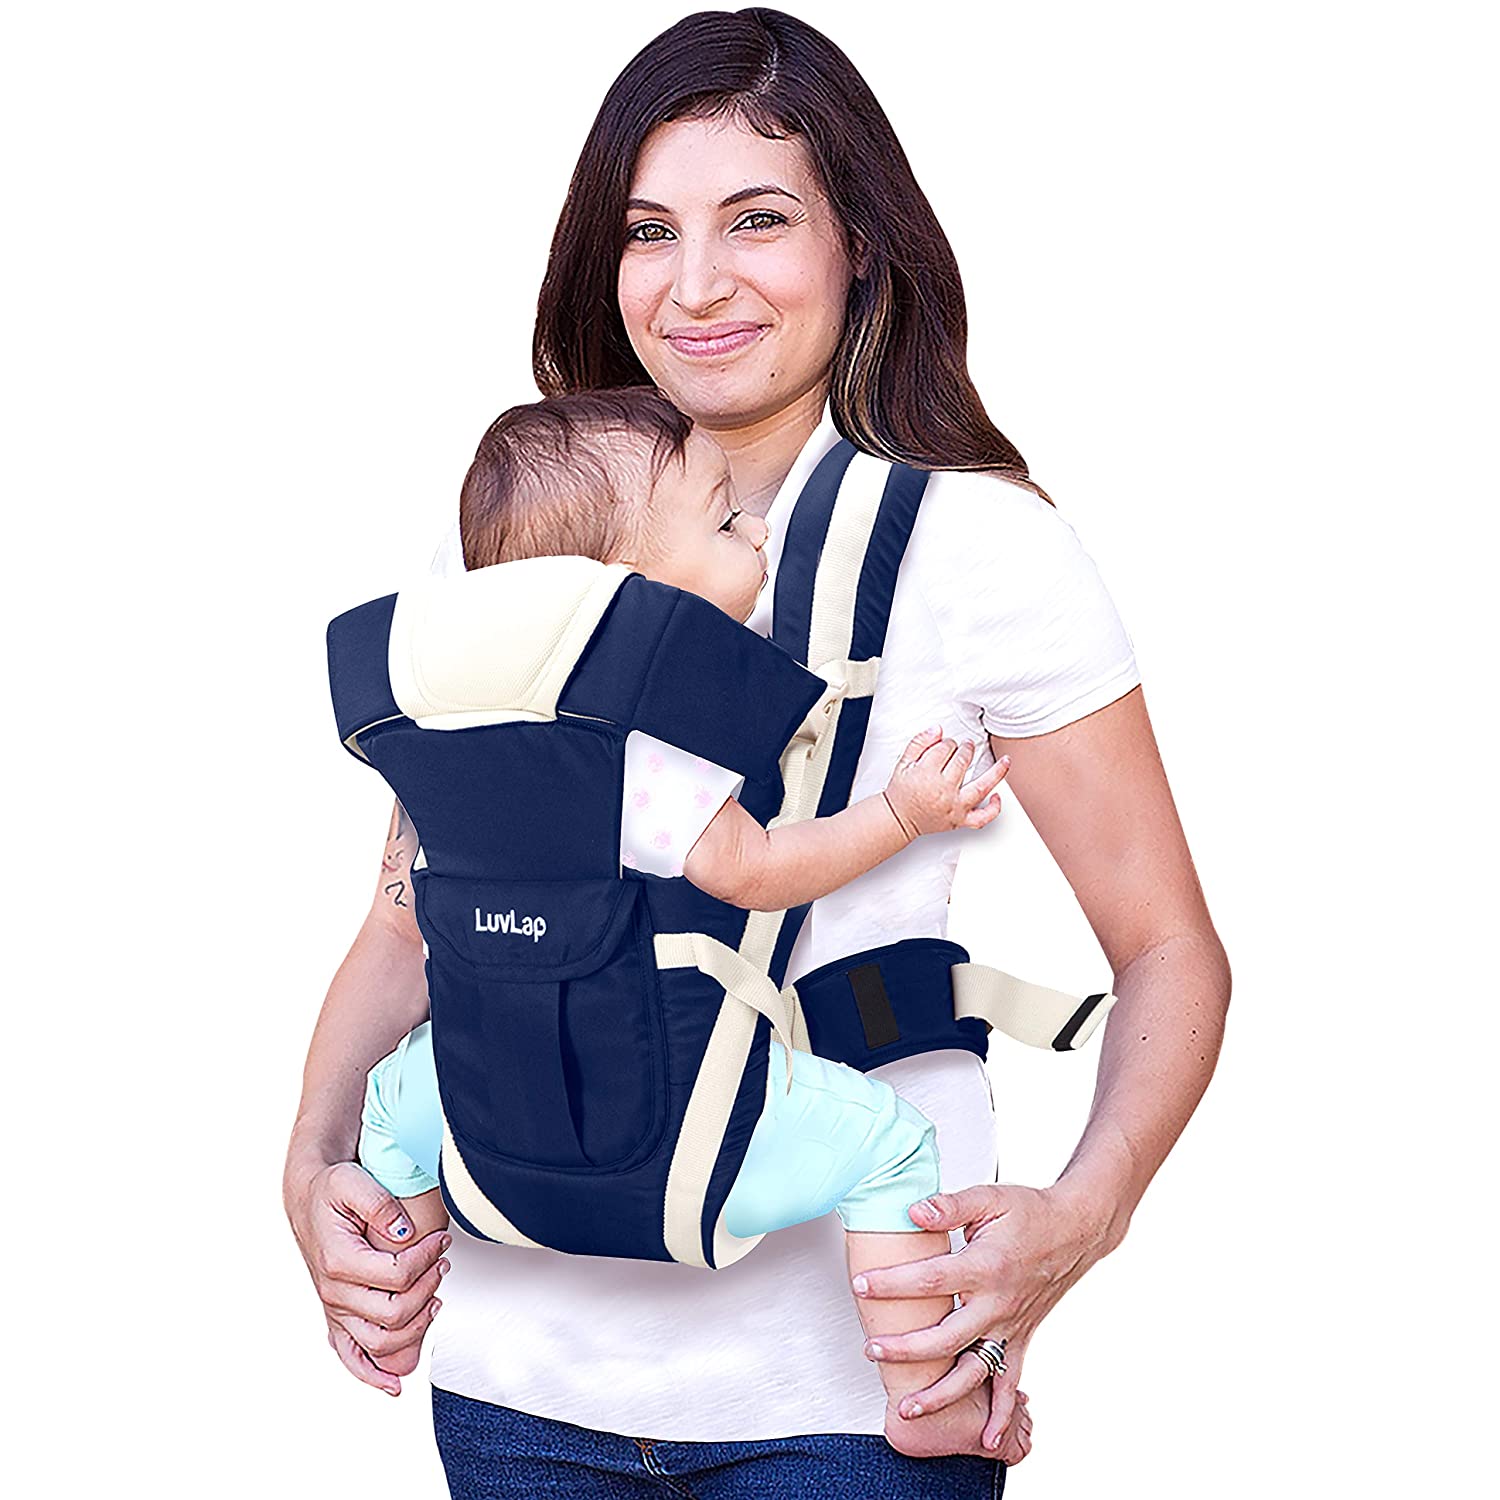 baby carrier travel bag